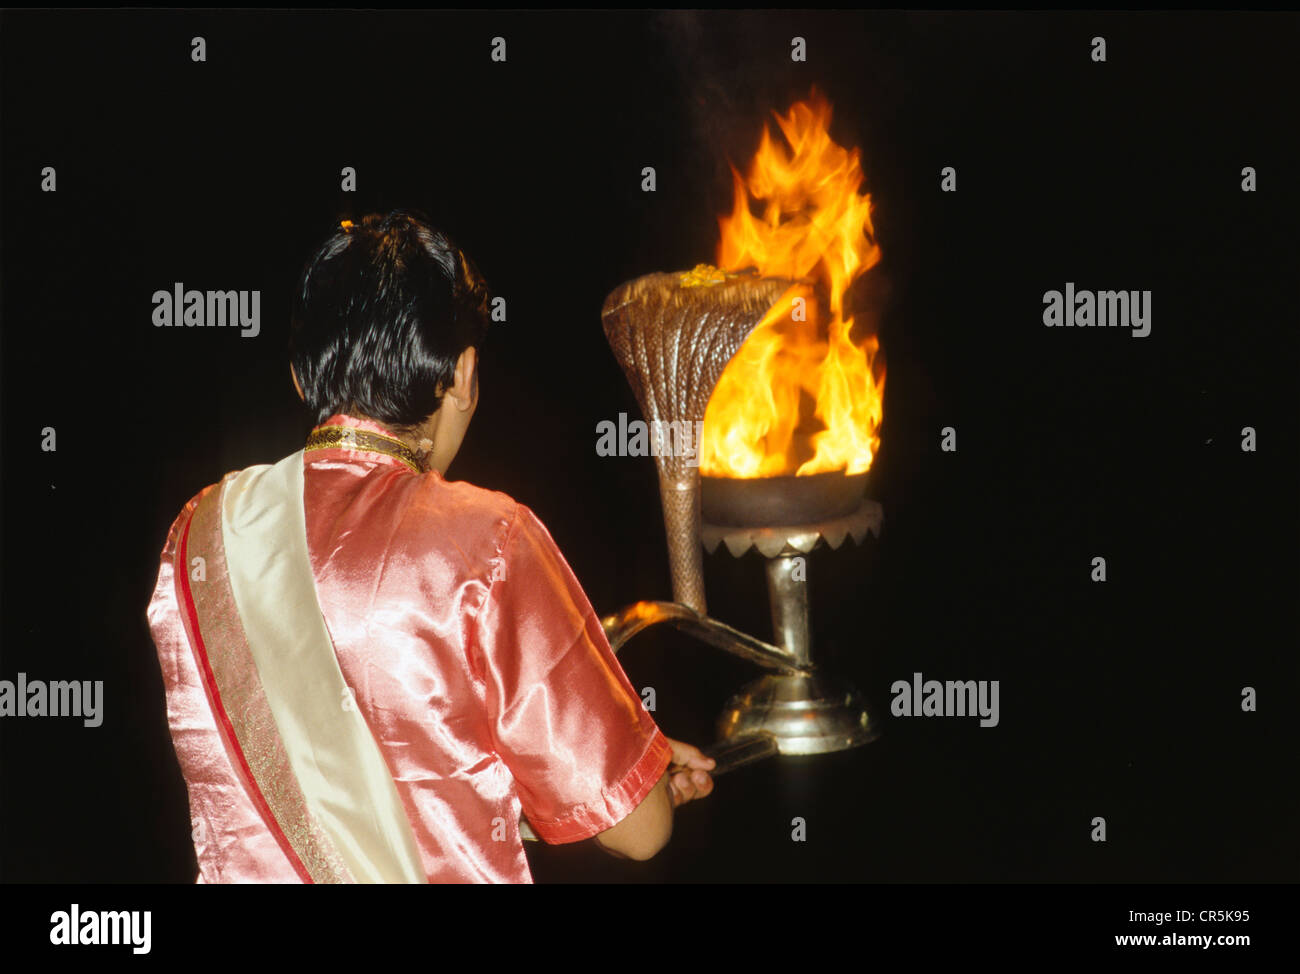 Aartii, the ceremony of Good Night to the River Ganges, performed by priests, Varanasi, Uttar Pradesh, India, Asia Stock Photo